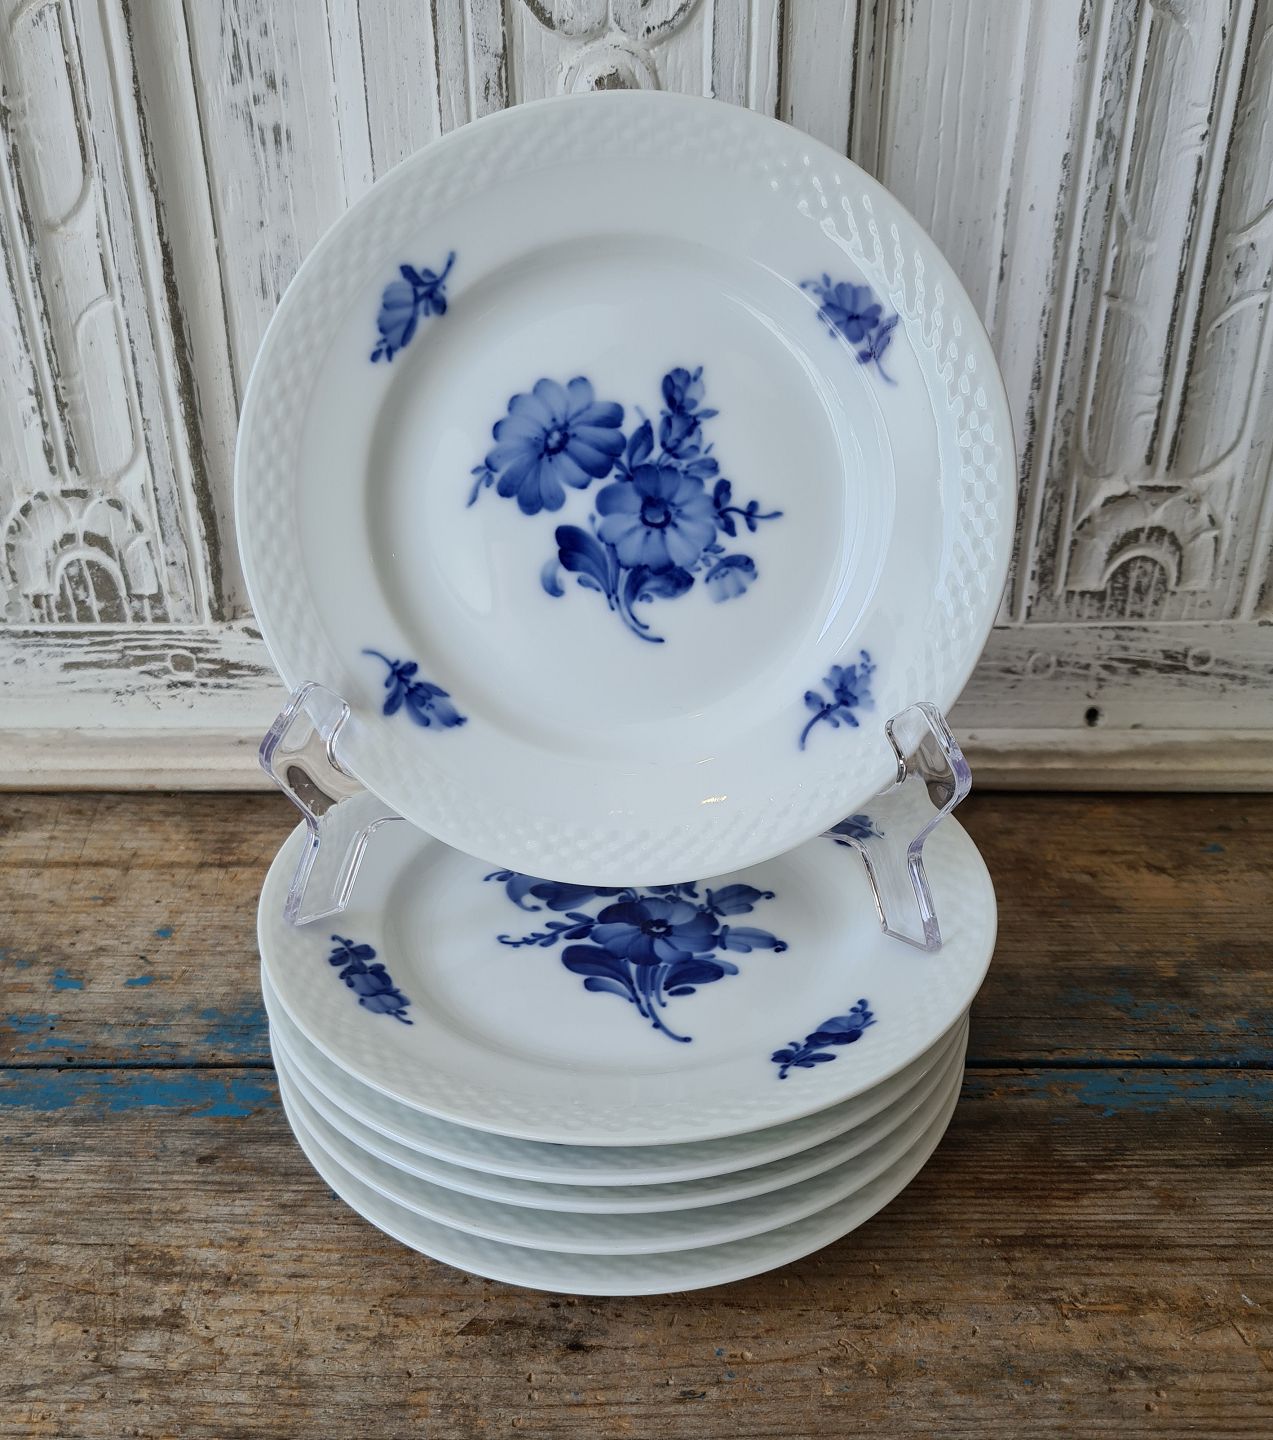 Cake plate from the Blue Flower series, braided model 8092